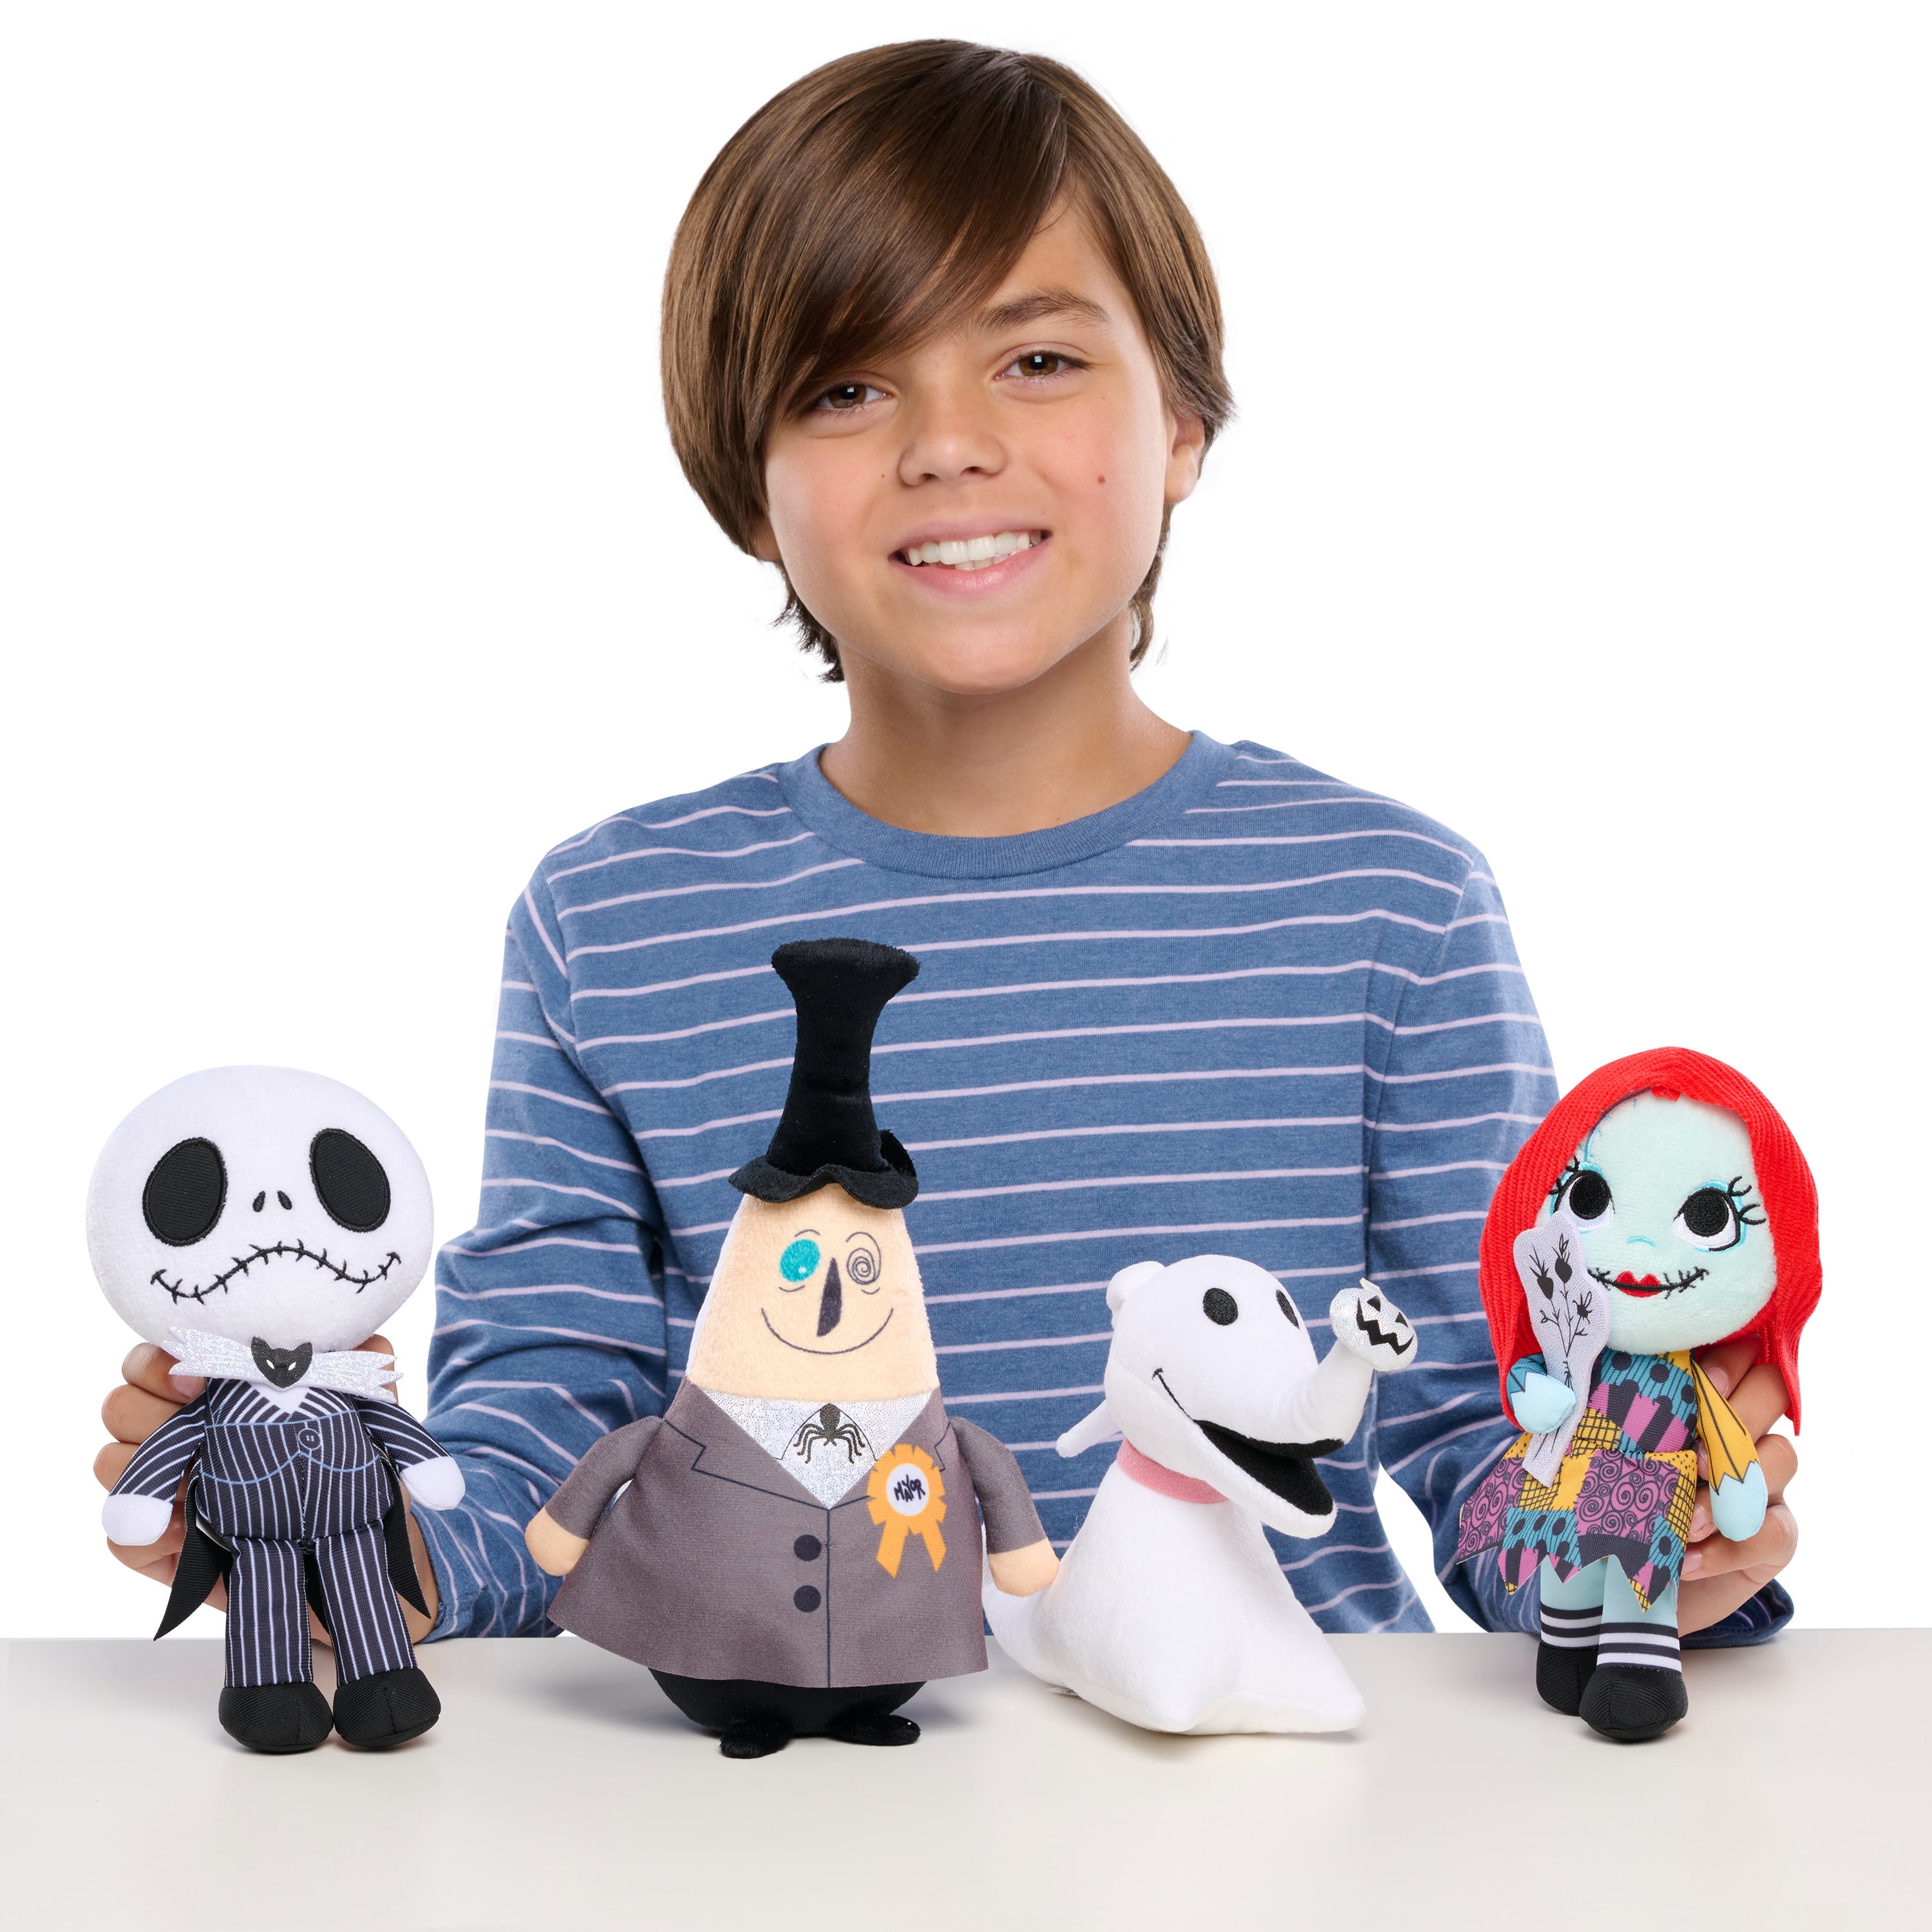 Disney Tim Burton's The Nightmare Before Christmas Disney100 4-piece Plush  Collector Set, Kids Toys for Ages 3 up